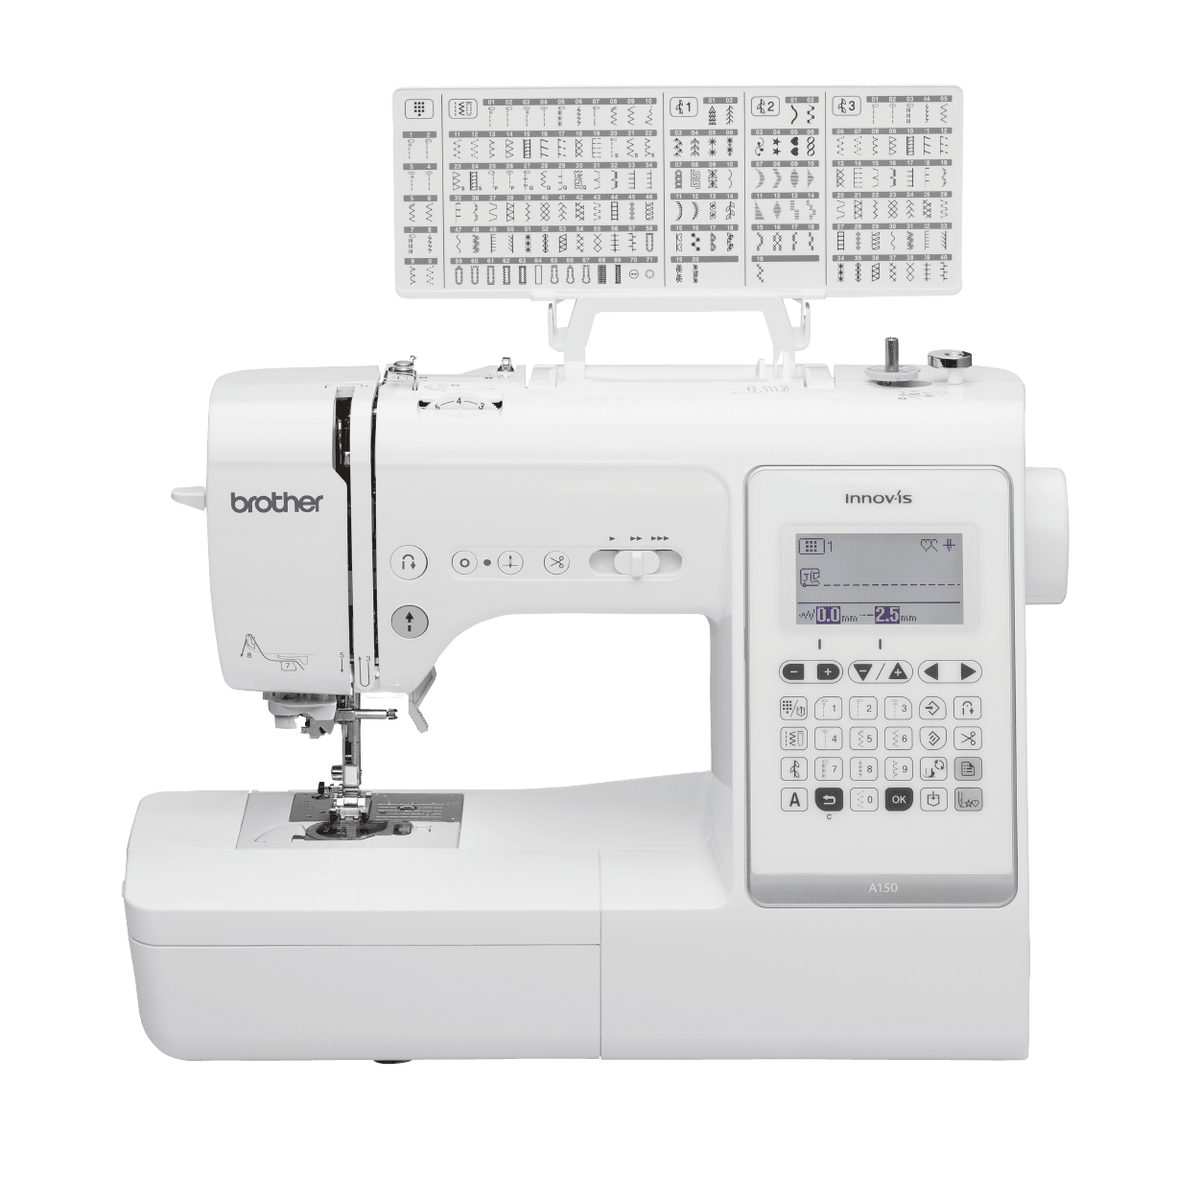 Brother A-150 Sewing Machine - MY SEWING MALL